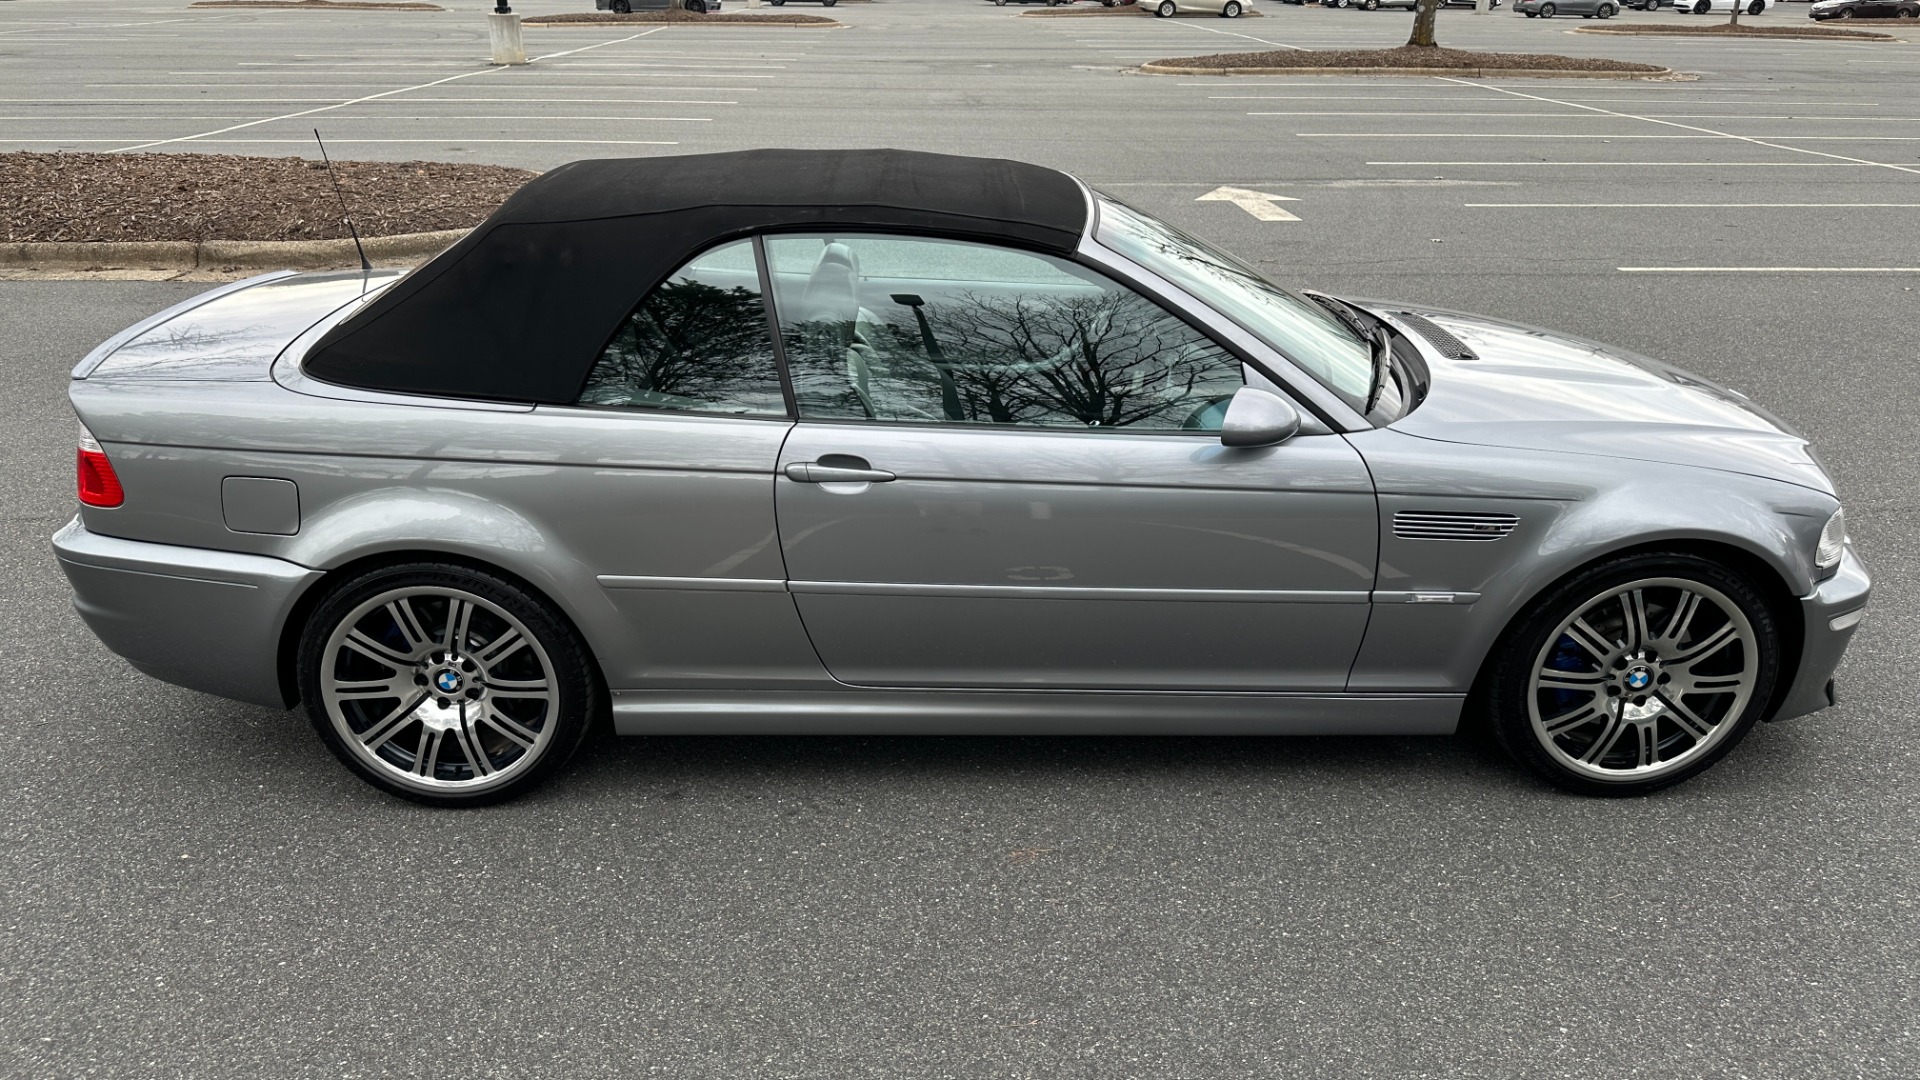 Used 2006 BMW M3 CONVERTIBLE / SMG AUTO / LEATHER / INLINE 6CYL / CARBON FIBER for sale $26,595 at Formula Imports in Charlotte NC 28227 38